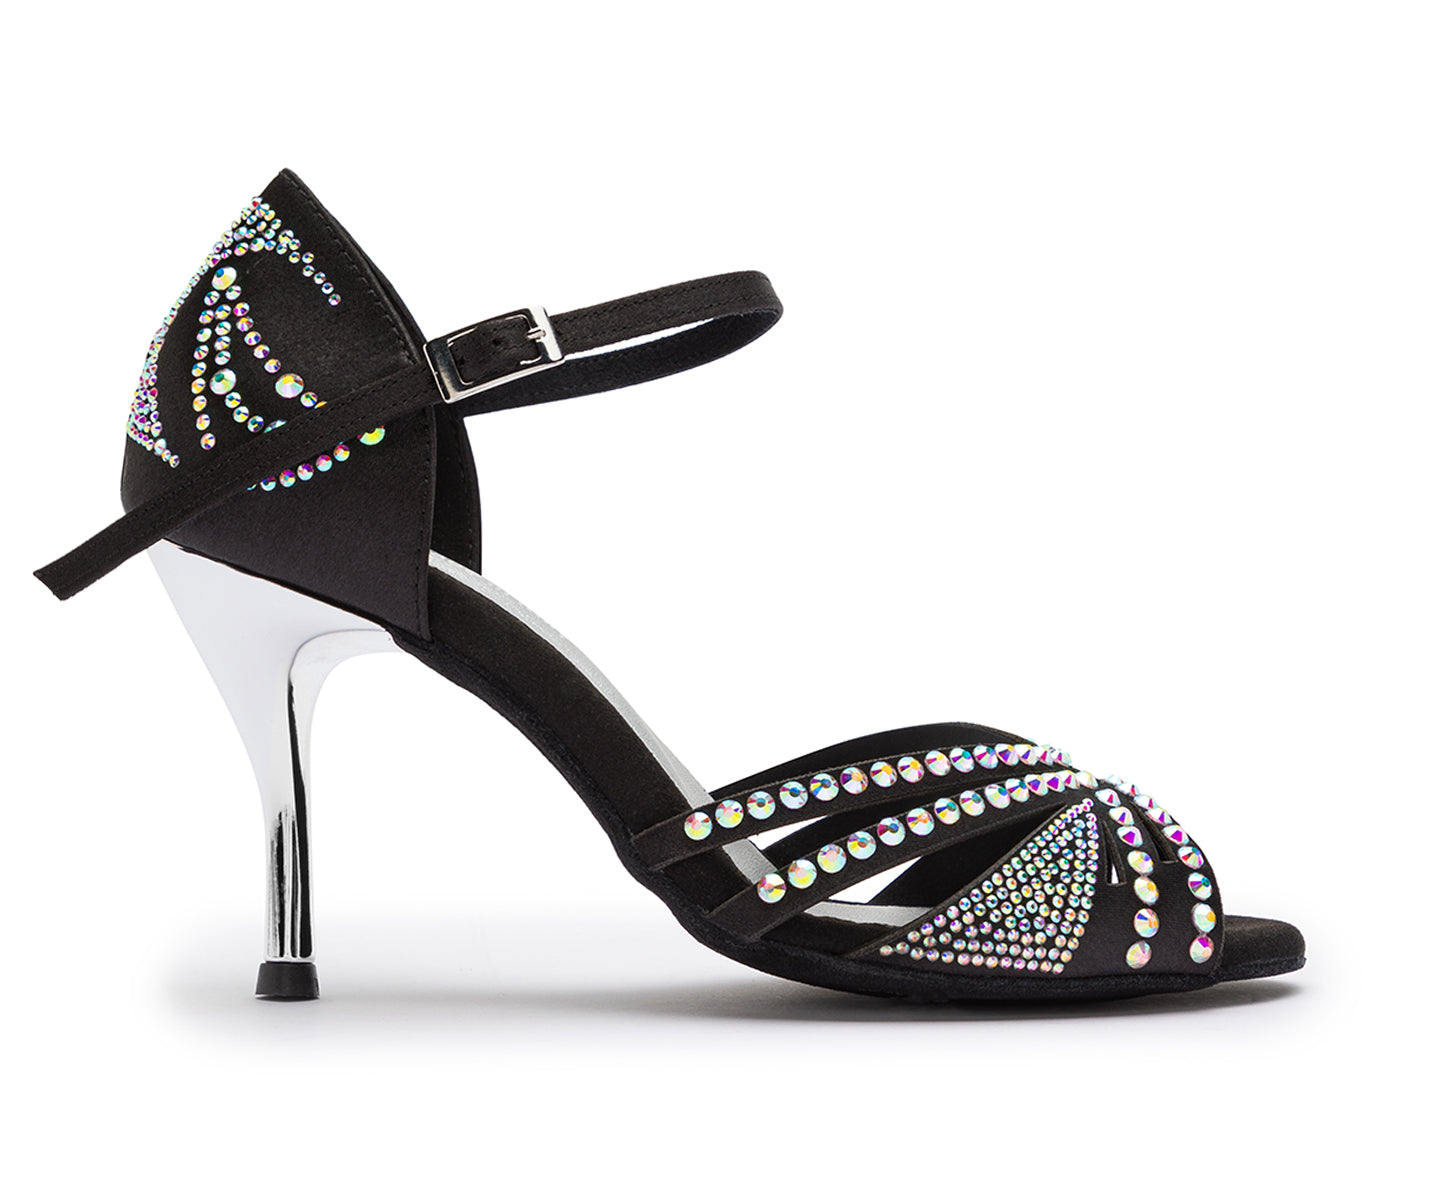 DQ L3m dance shoes in black with rhinestones